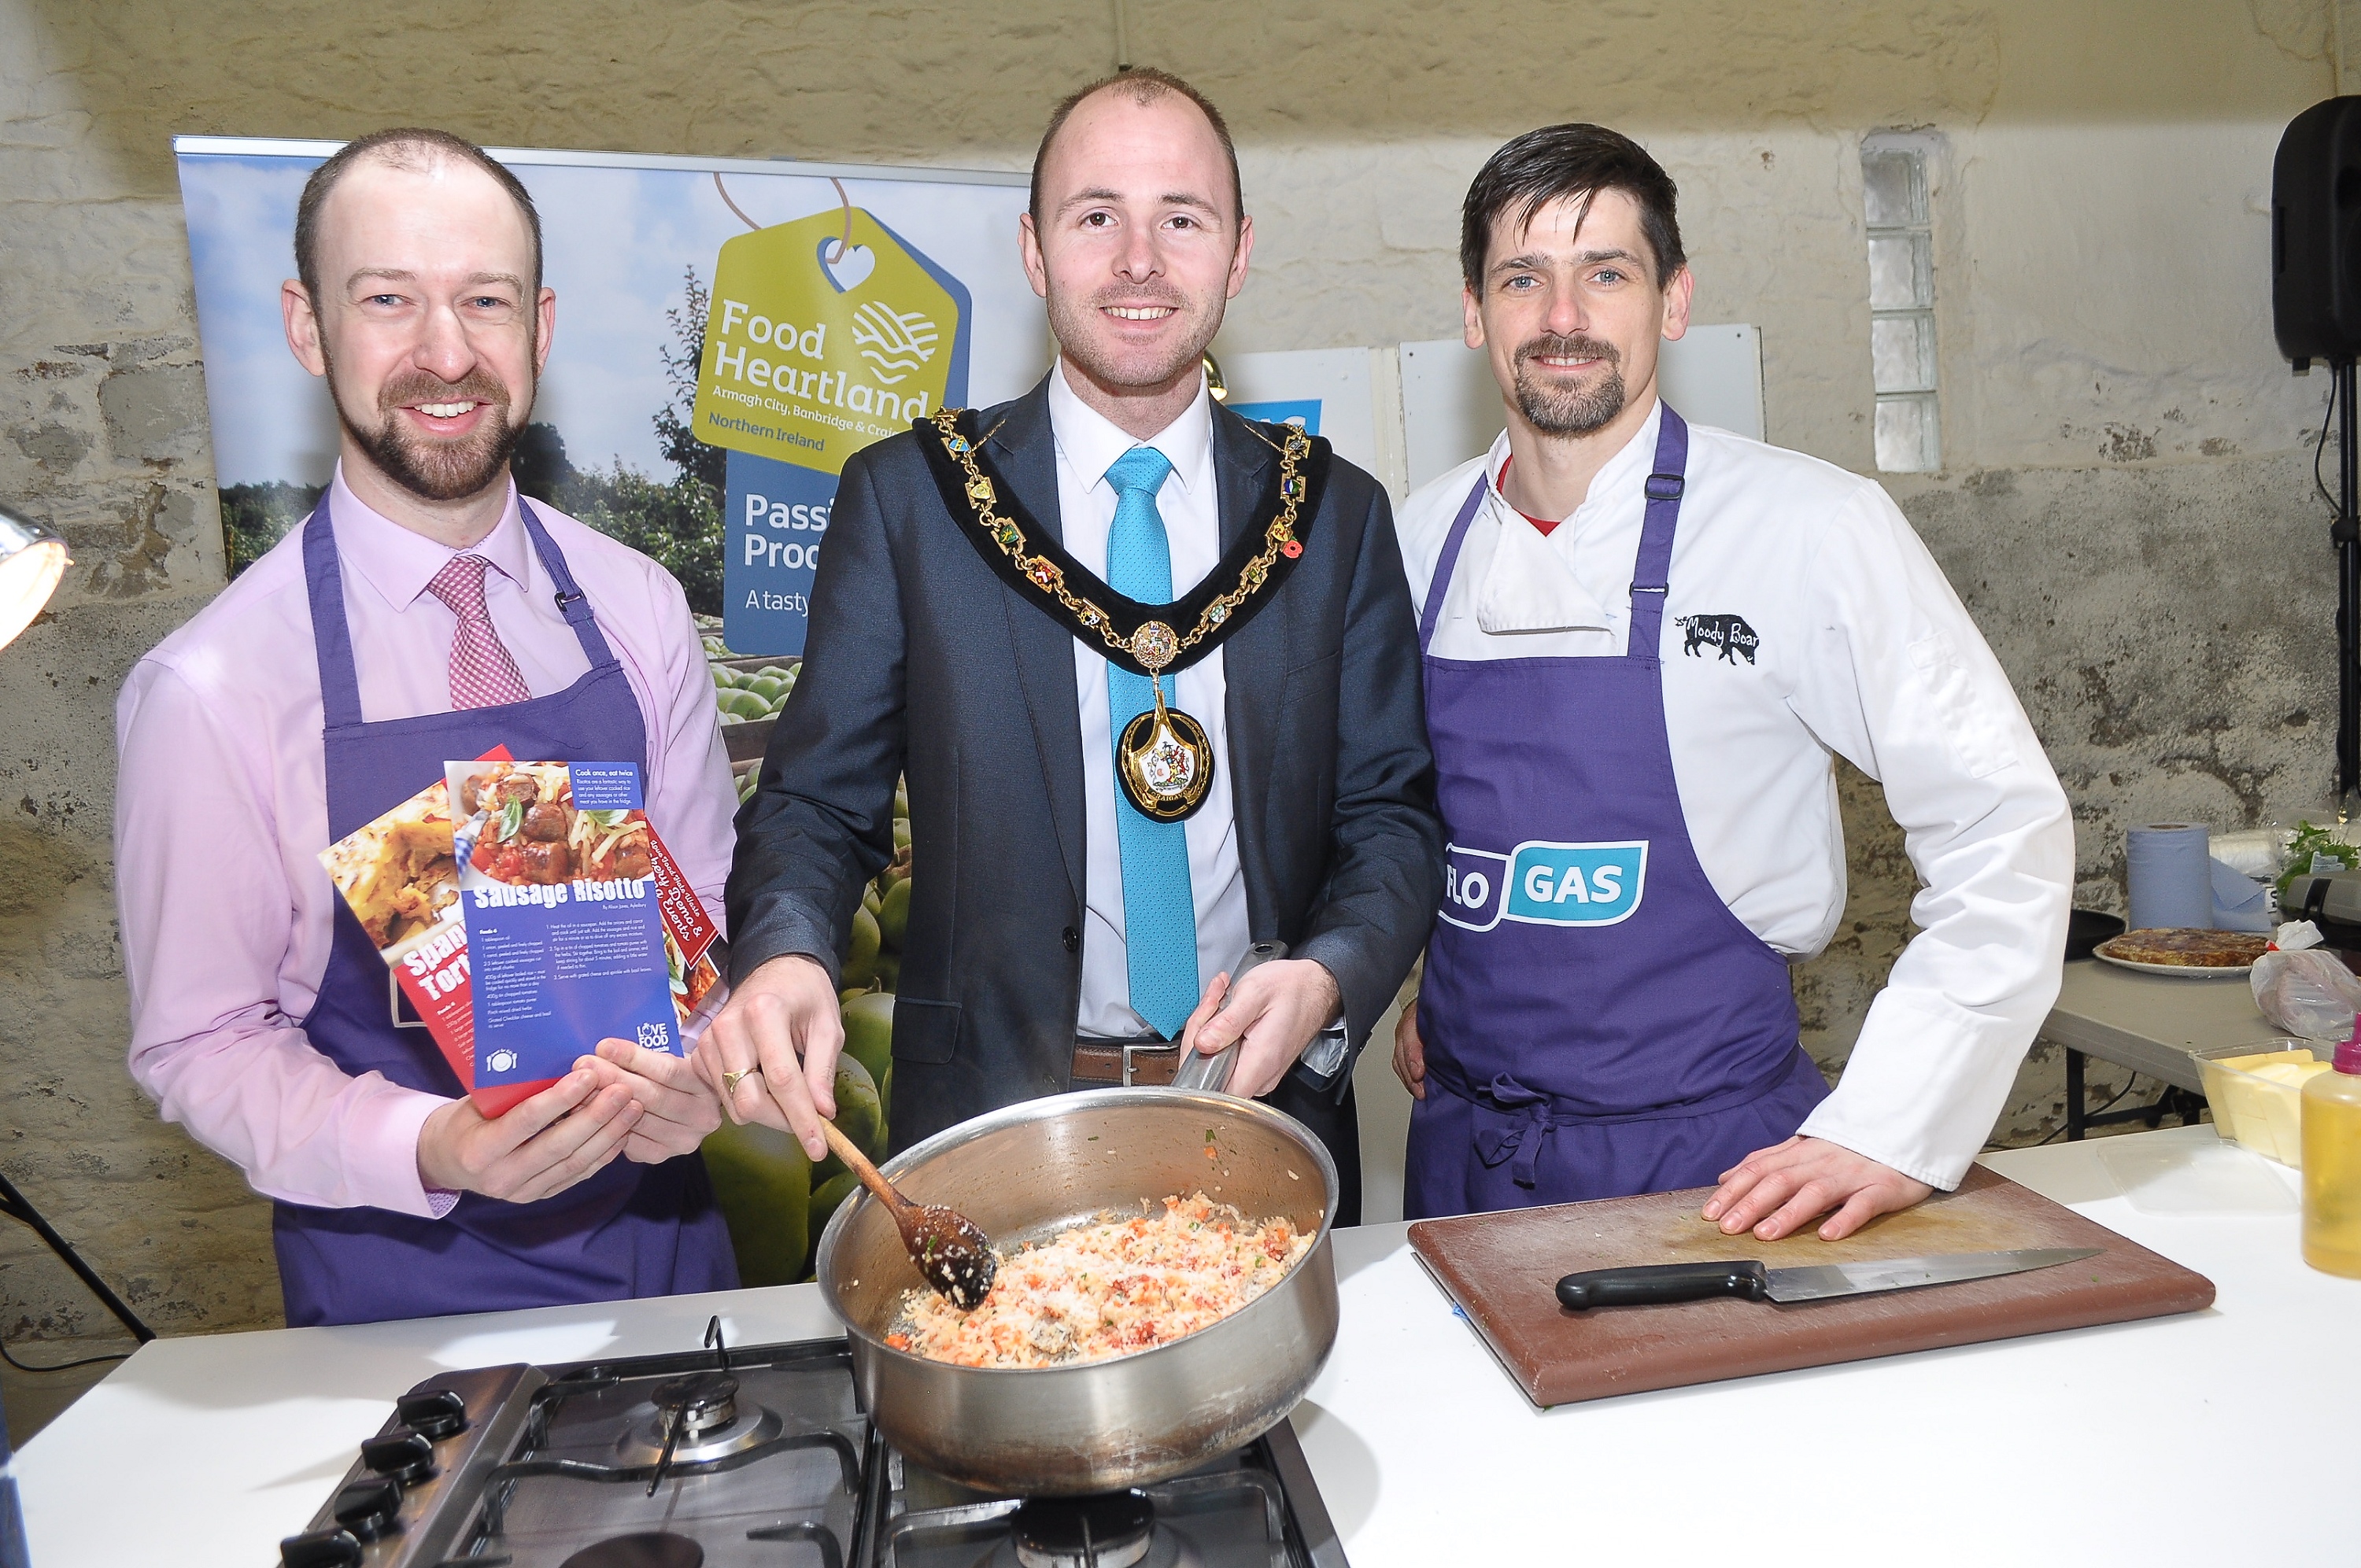 Lord Mayor of Armagh, Banbridge and Craigavon Councillor Darryn Causby with chef Sean Farnan and Paul Ruegg from Flogas – CREDIT: LiamMcArdle.com